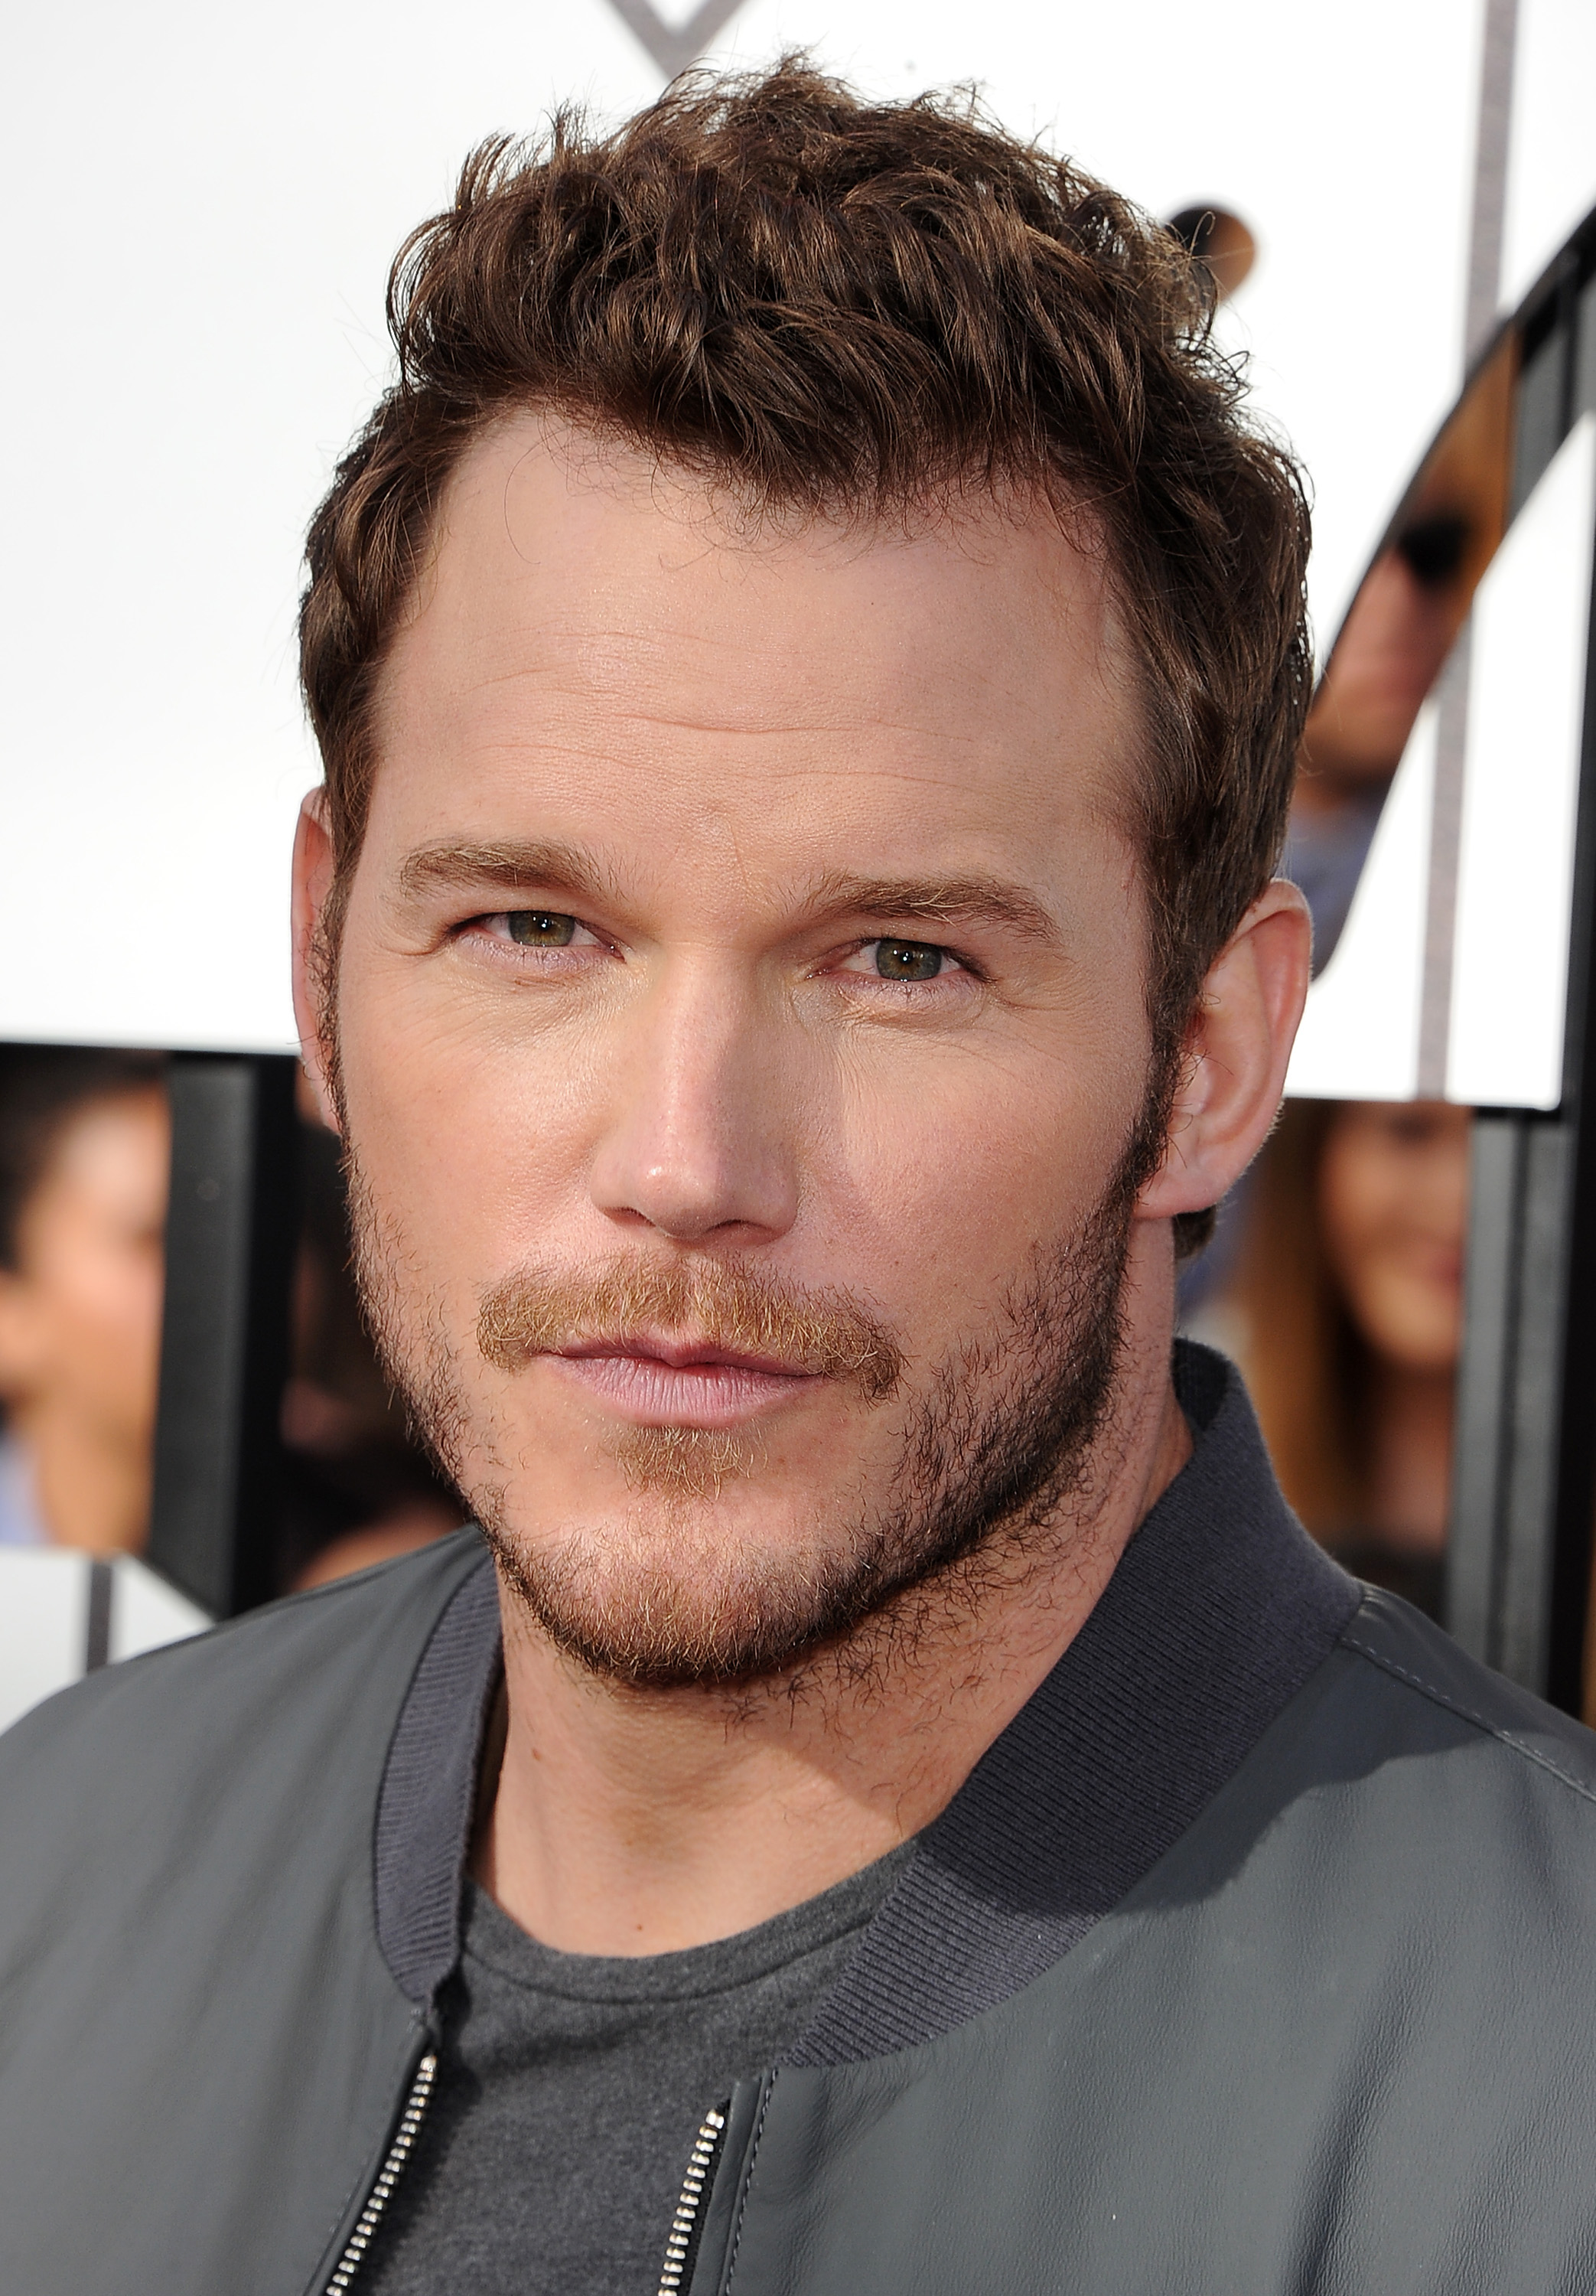 LOS ANGELES, CA - APRIL 13:  Actor Chris Pratt attends the 2014 MTV Movie Awards at Nokia Theatre L.A. Live on April 13, 2014 in Los Angeles, California.  (Photo by Steve Granitz/WireImage) (Steve Granitz&amp;mdash;WireImage)